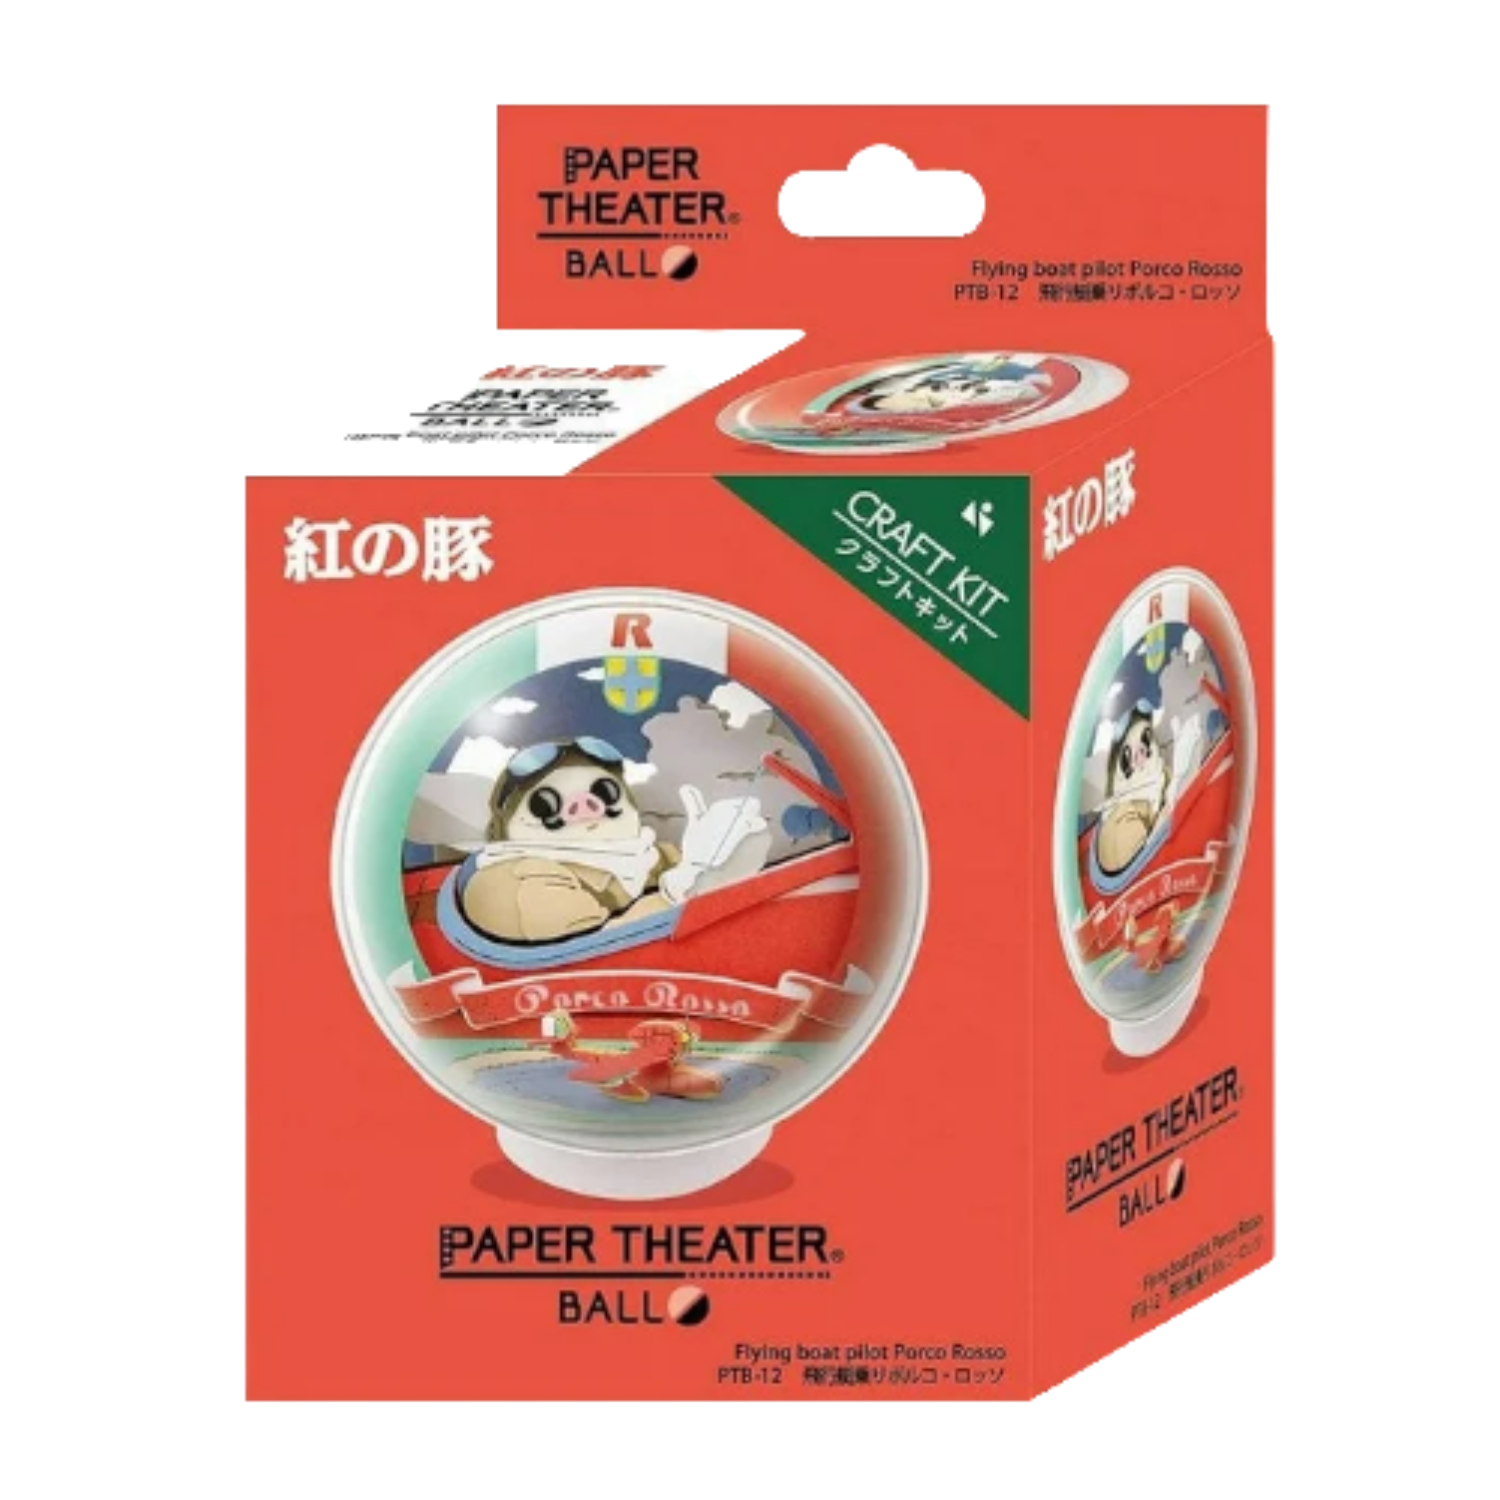 Porco Rosso Paper Theater Ball